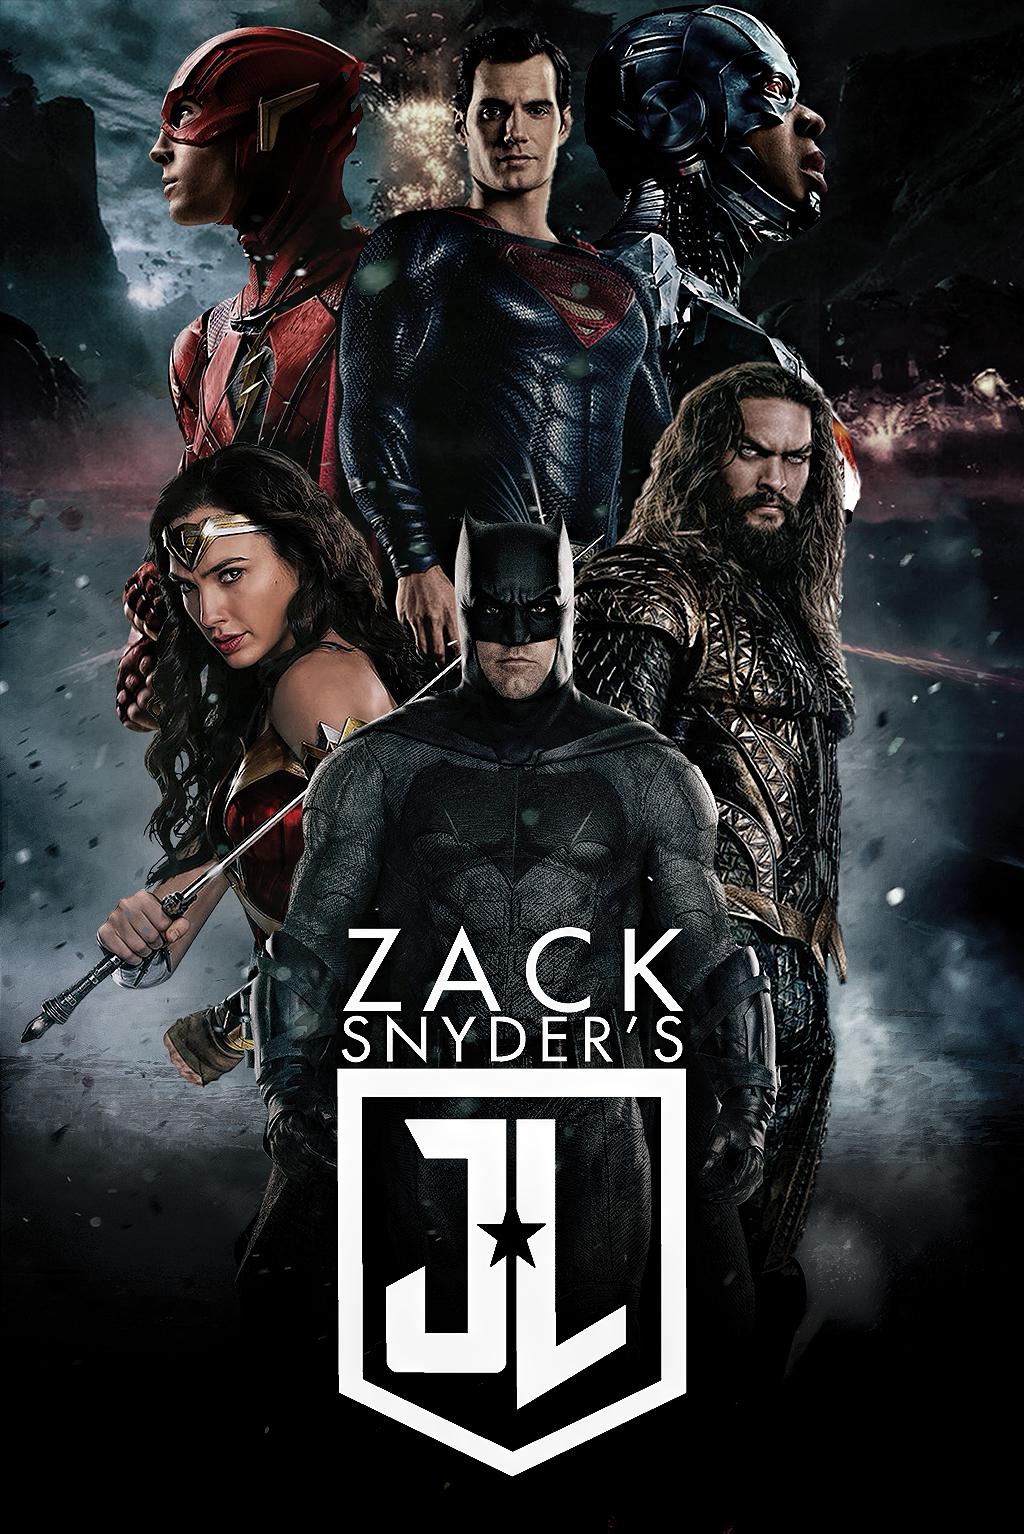 FAN MADE: My Submission For Zack Snyder's Justice League Fan